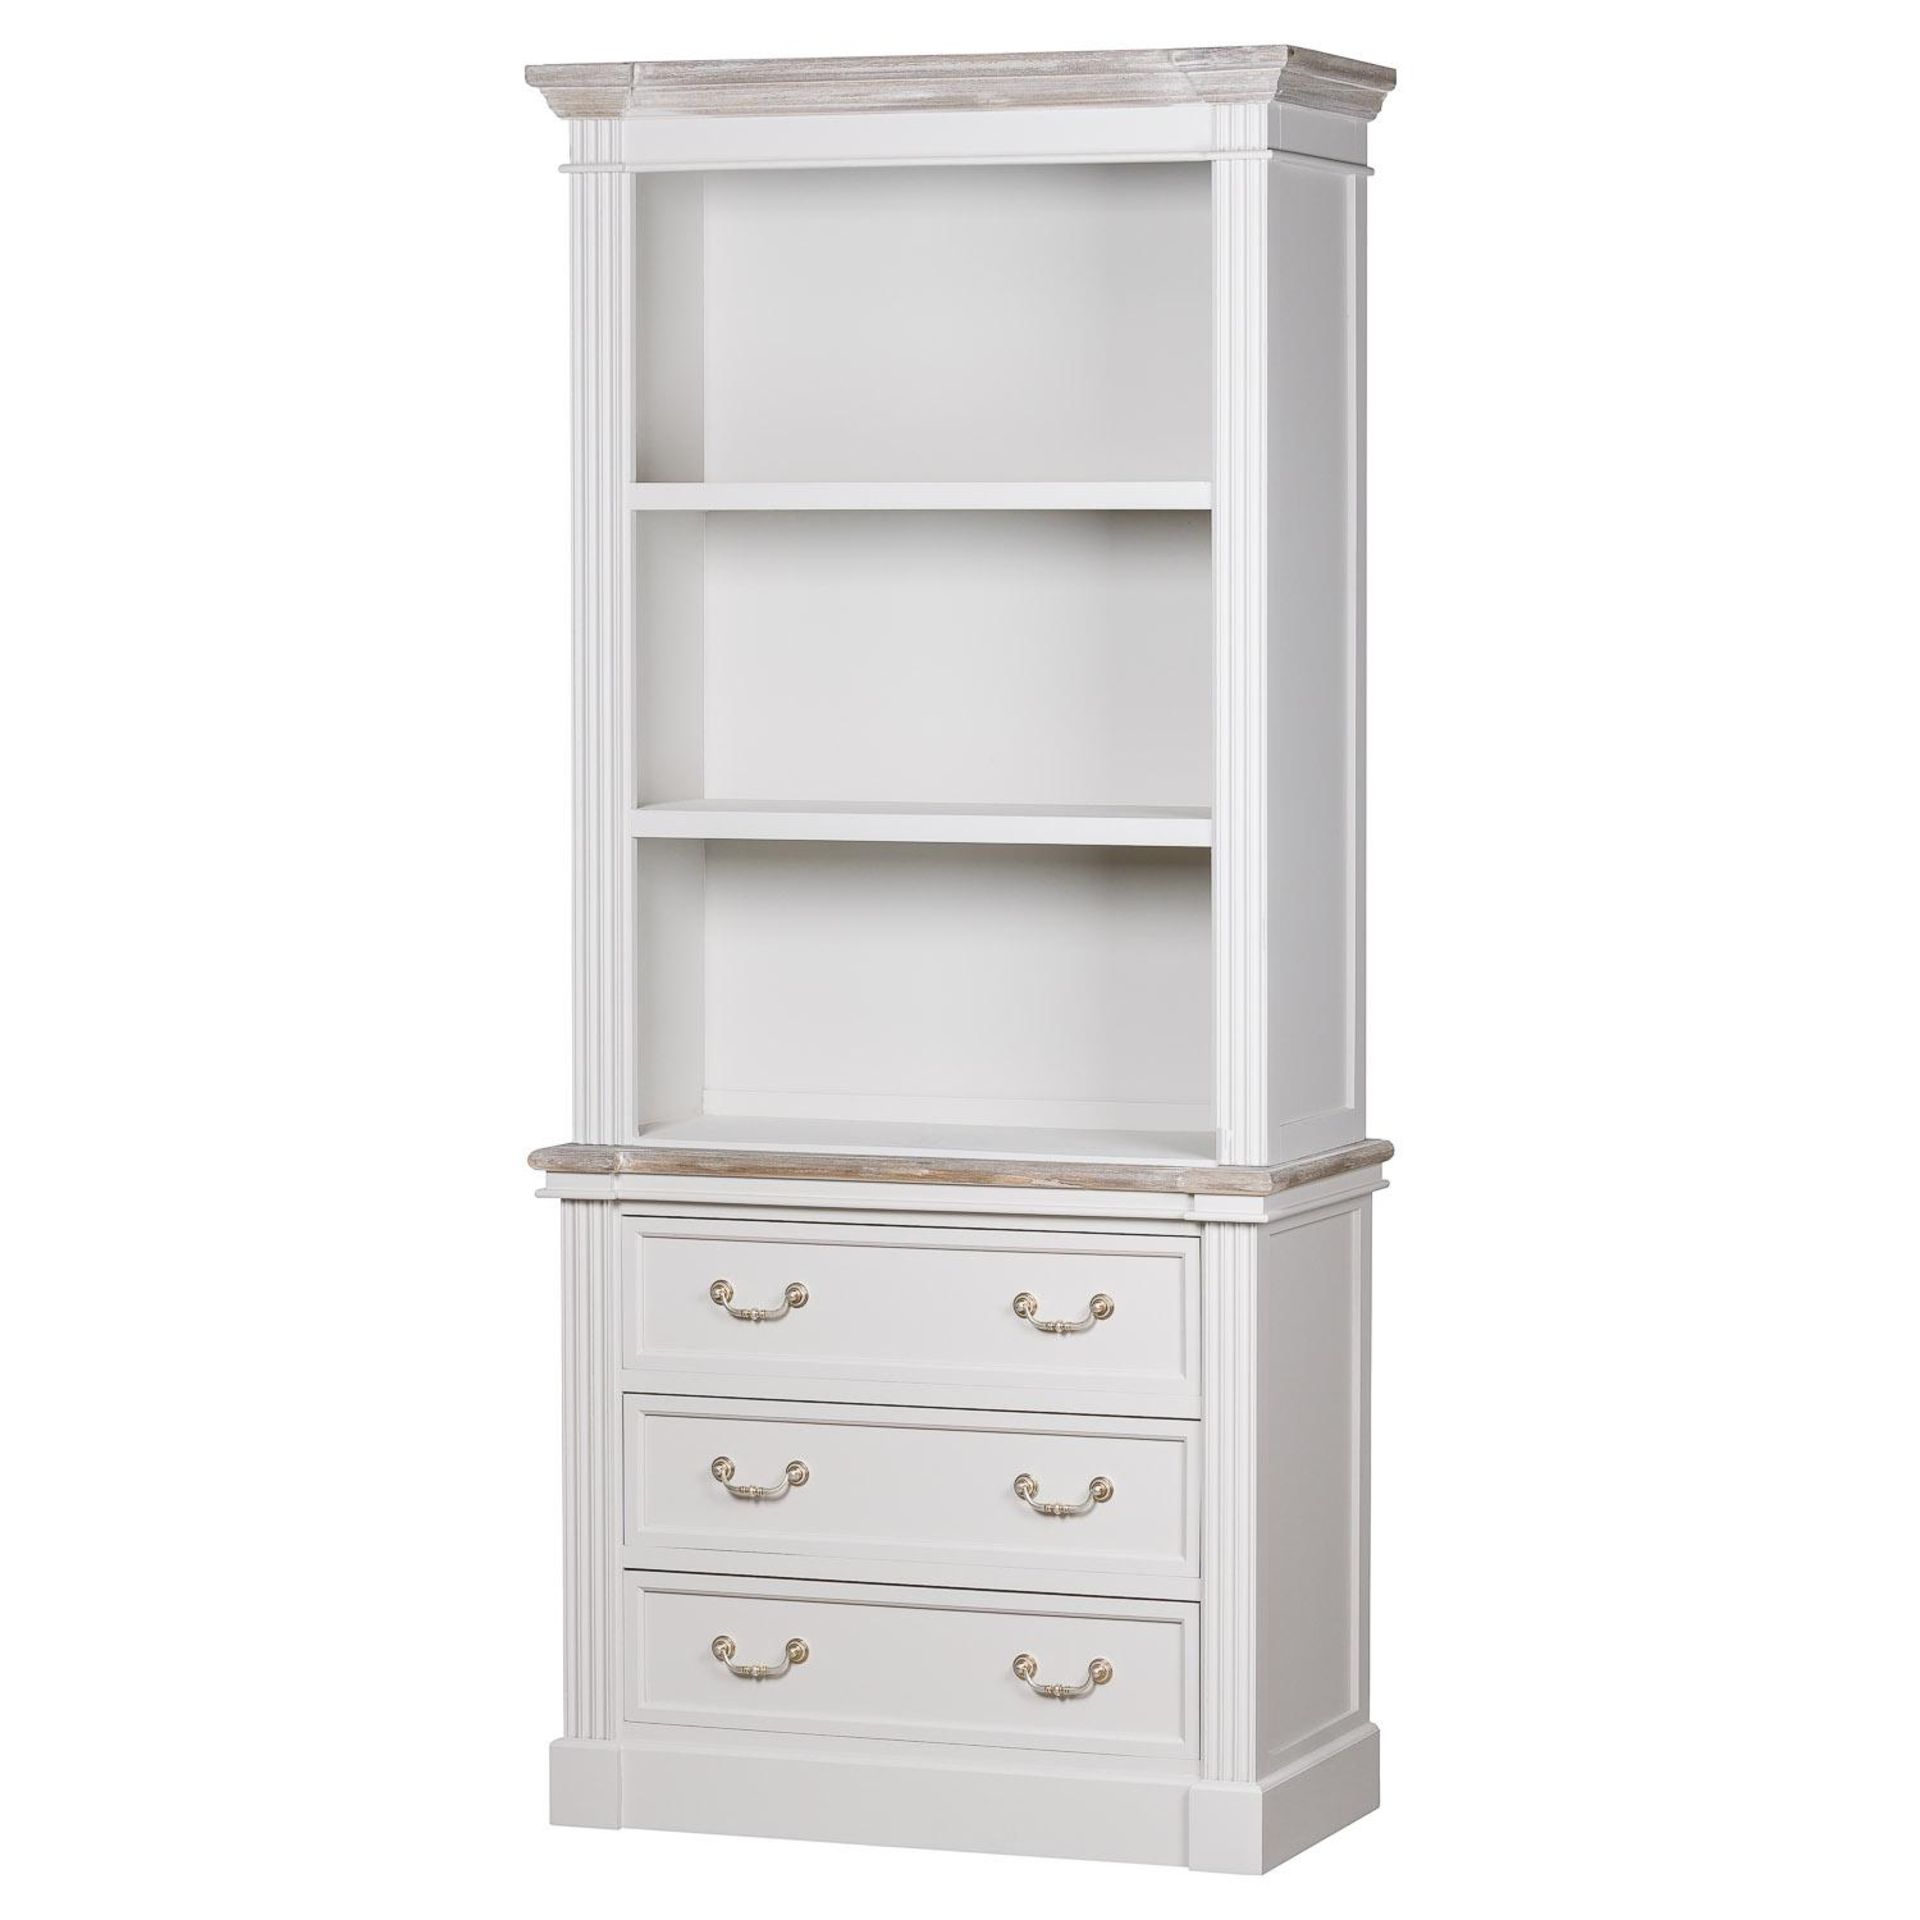 Liberty Collection Three Drawer Large Bookcase This is a Three Drawer Large Bookcase which would